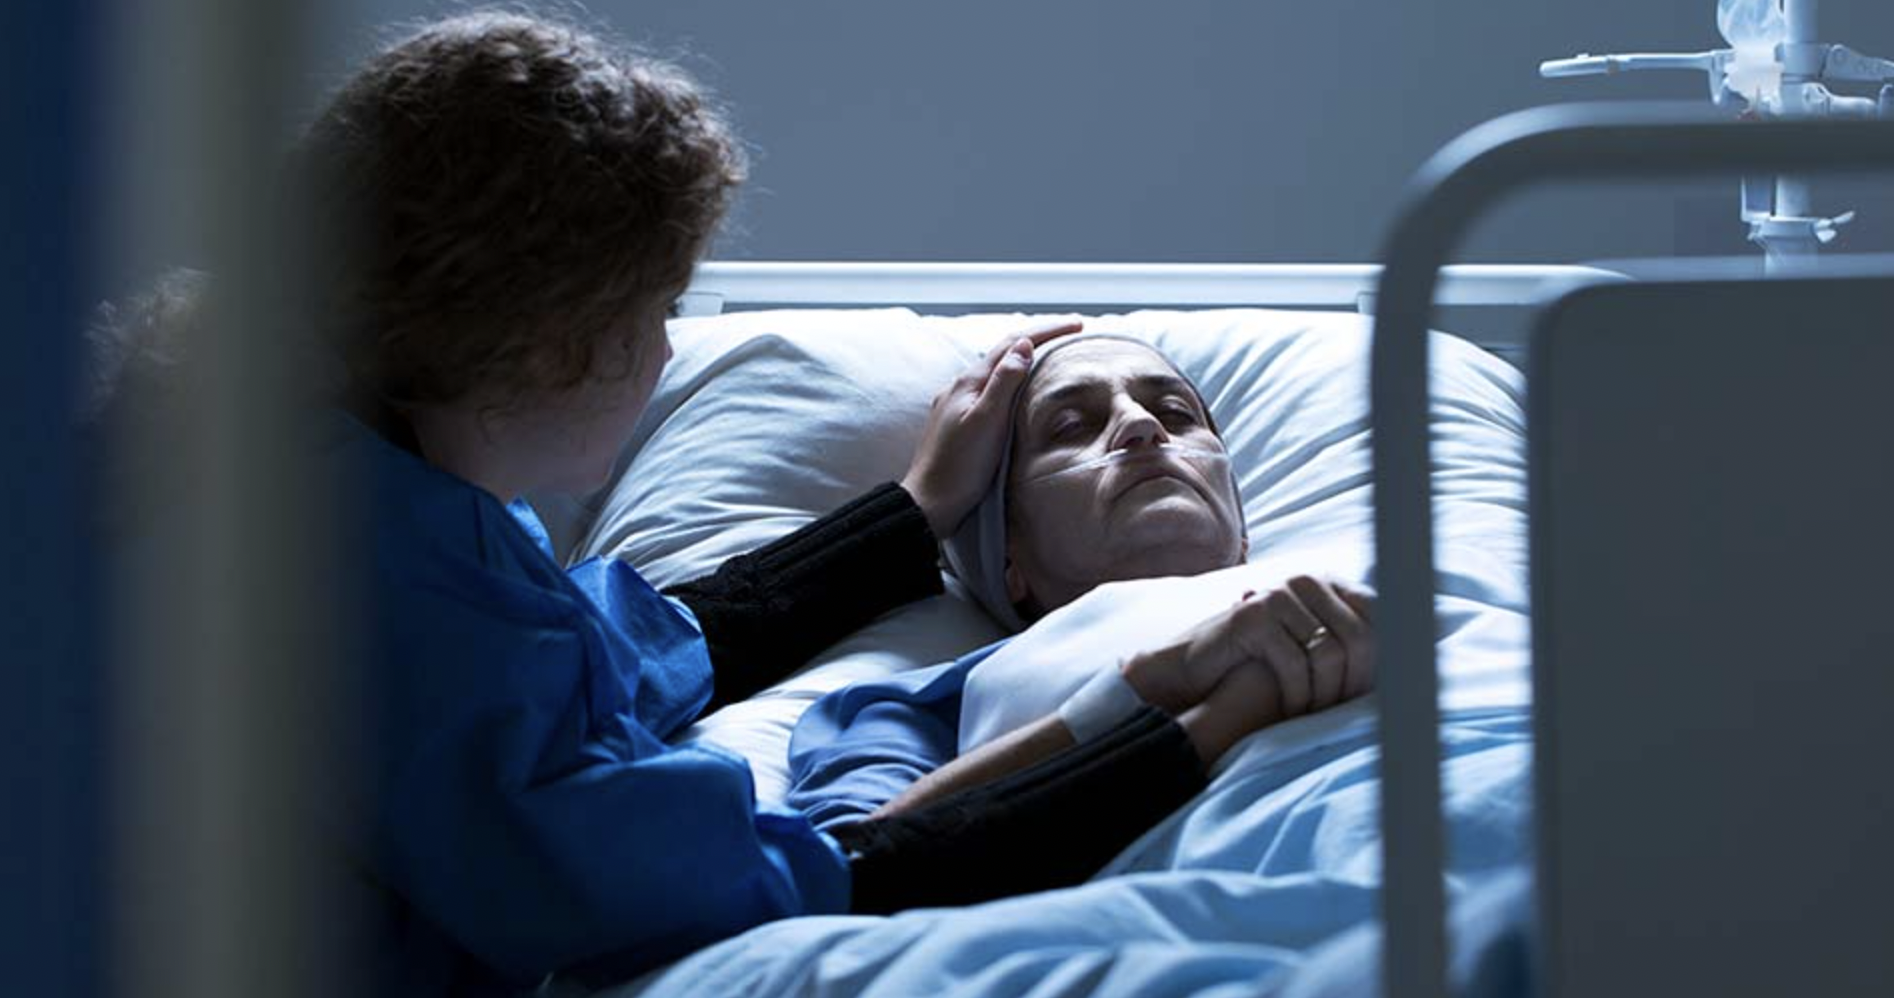 A patient lying in bed with their loved one next to them, caressing their hair.